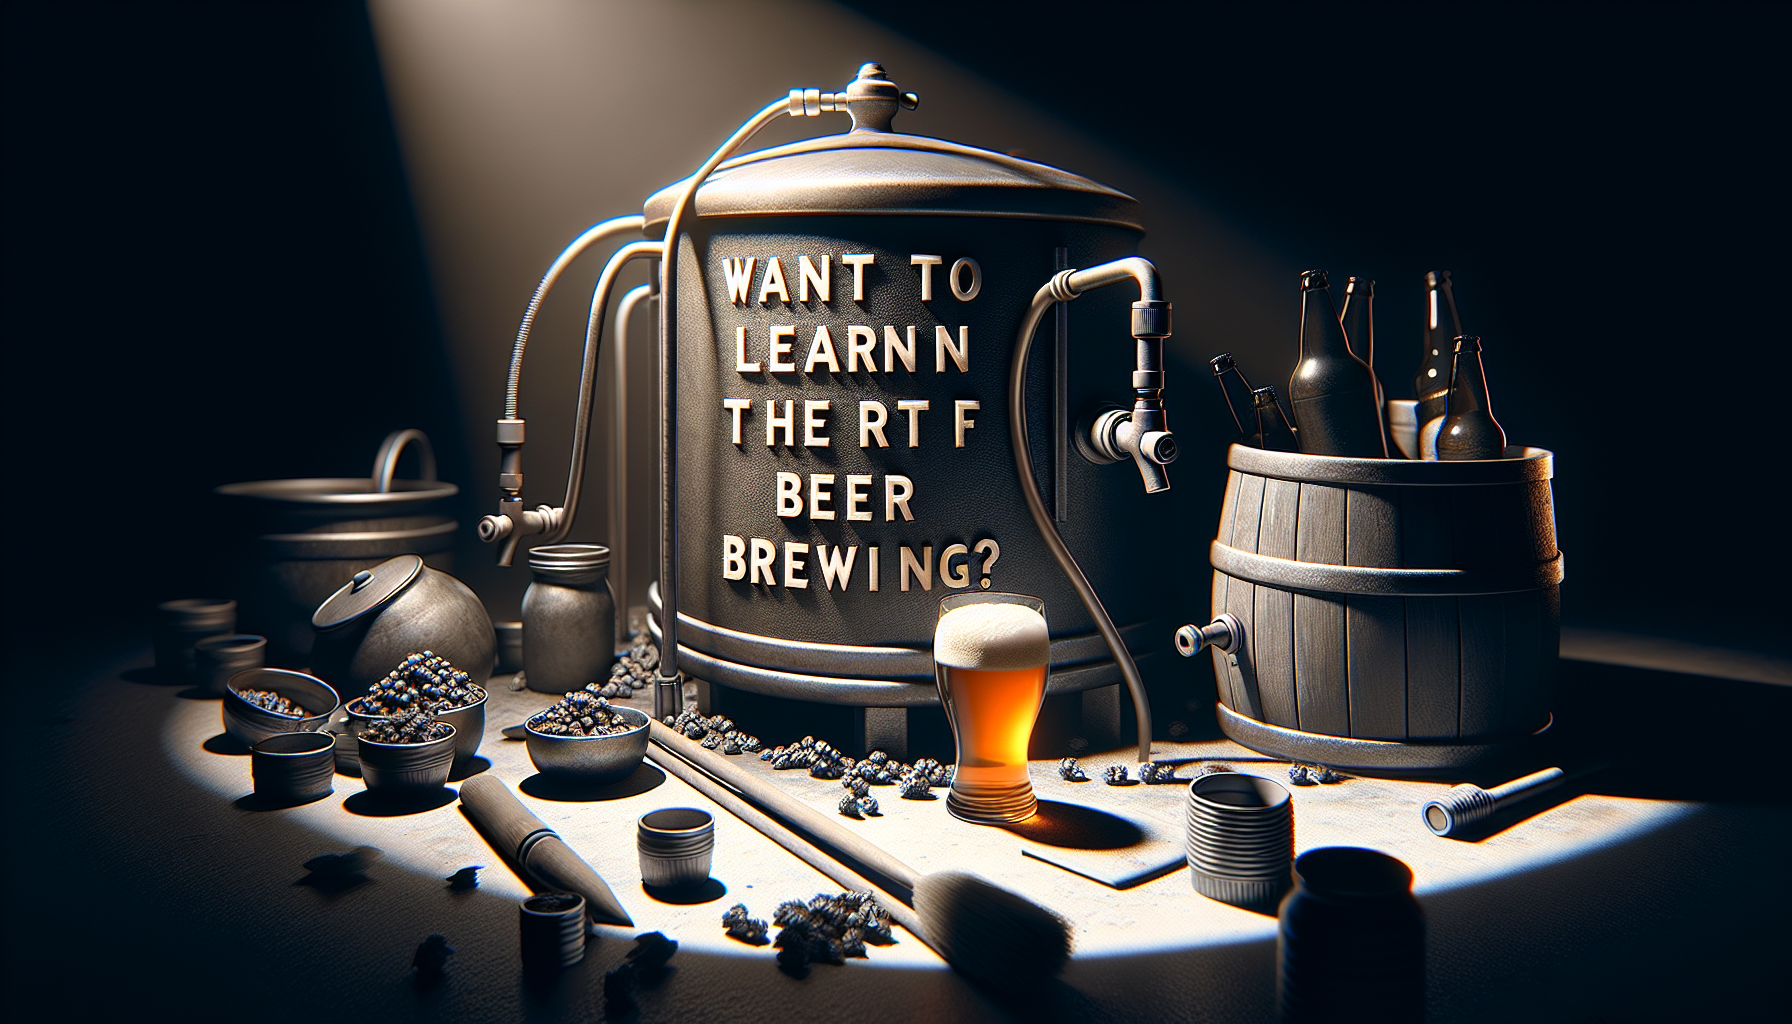 Want to Learn the Art of Beer Brewing?